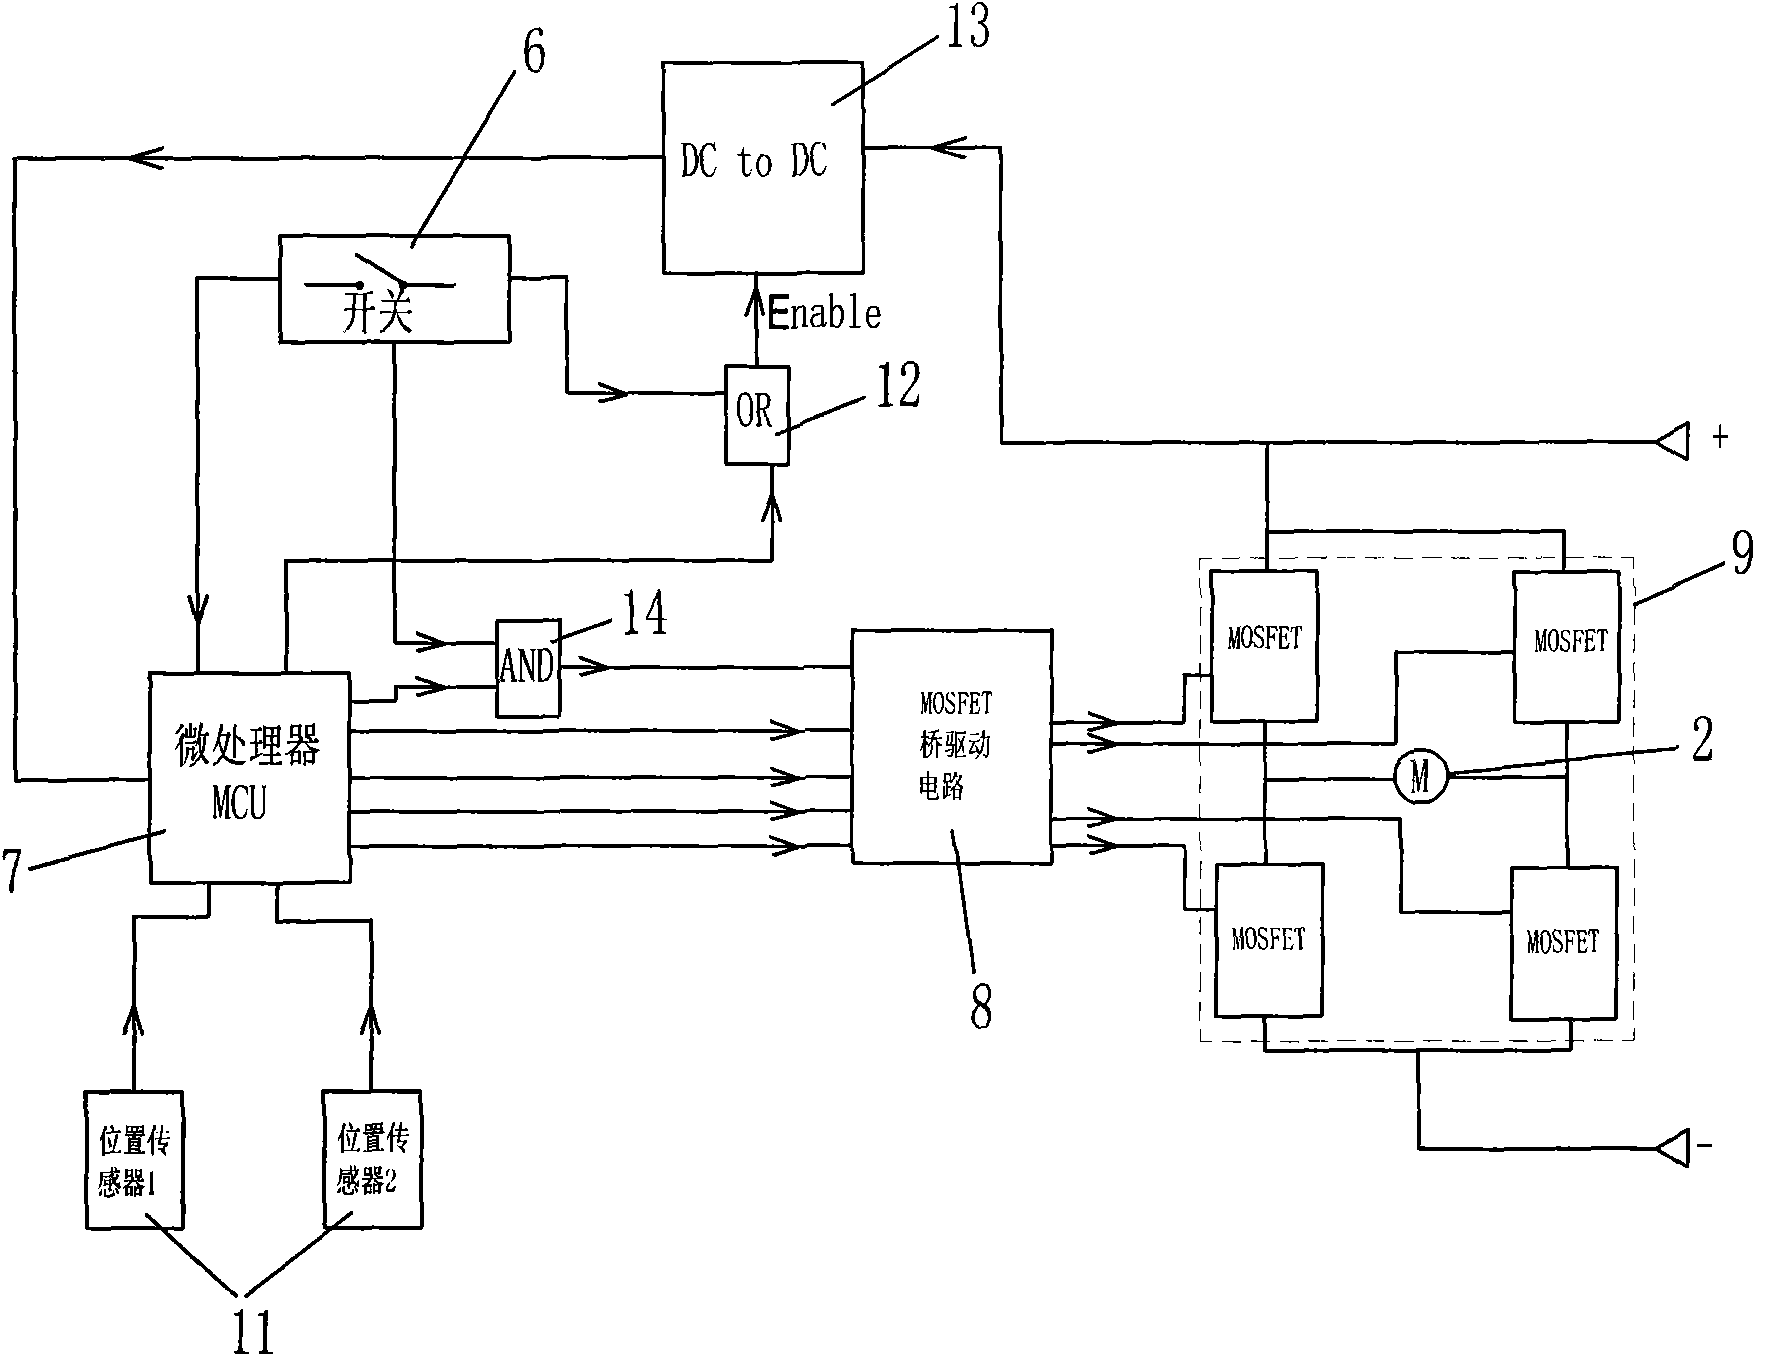 Control method of electric clippers